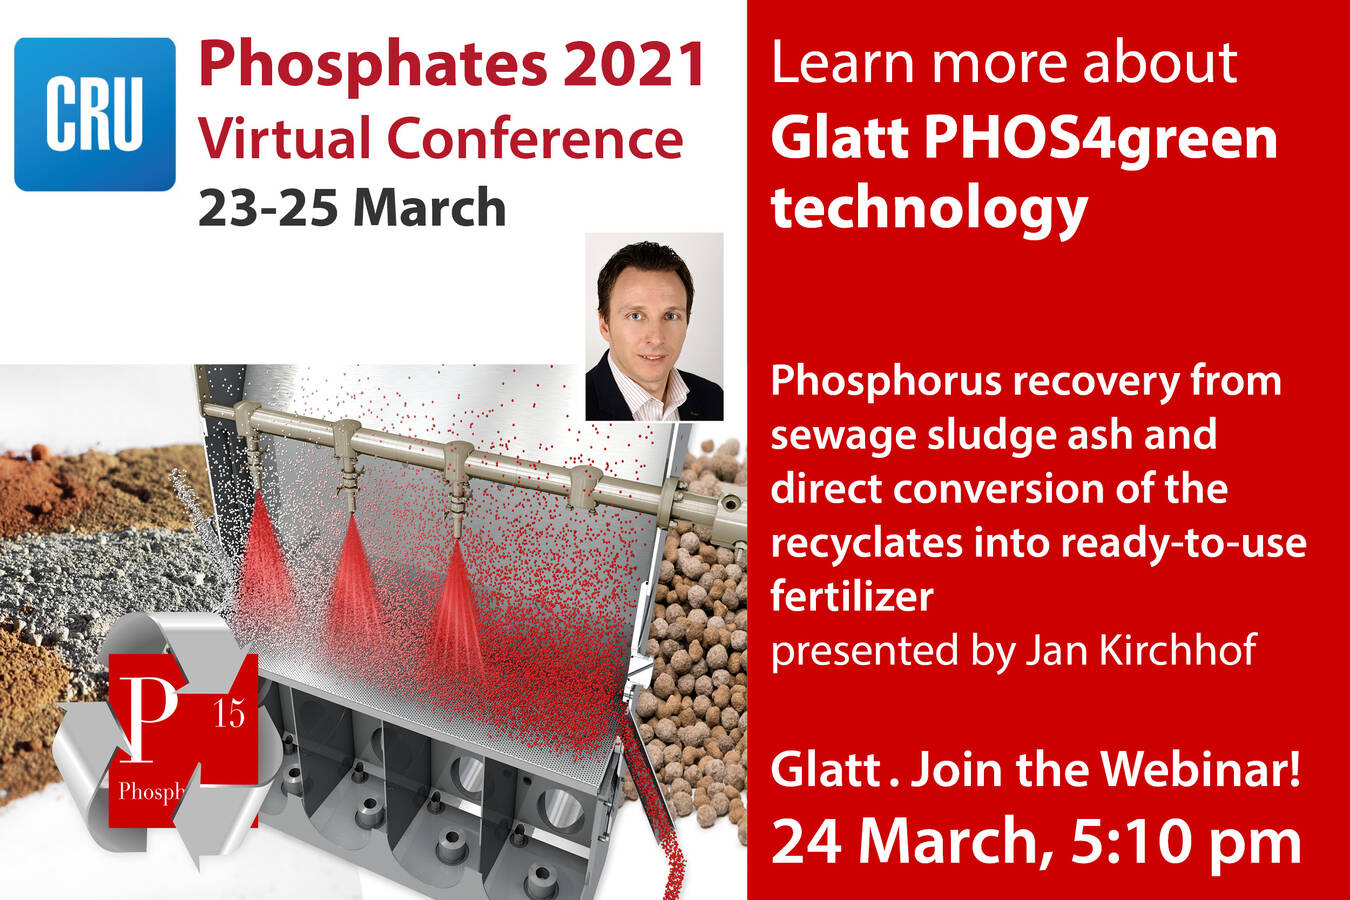 P-Recovery by PHOS4green @ Phosphates Virtual Conference Join the webinar: March 24, 2021 – 5.10 pm: Glatt will present phosphorus recycling from sewage slugde ash with direct convertion into standard fertilizers

